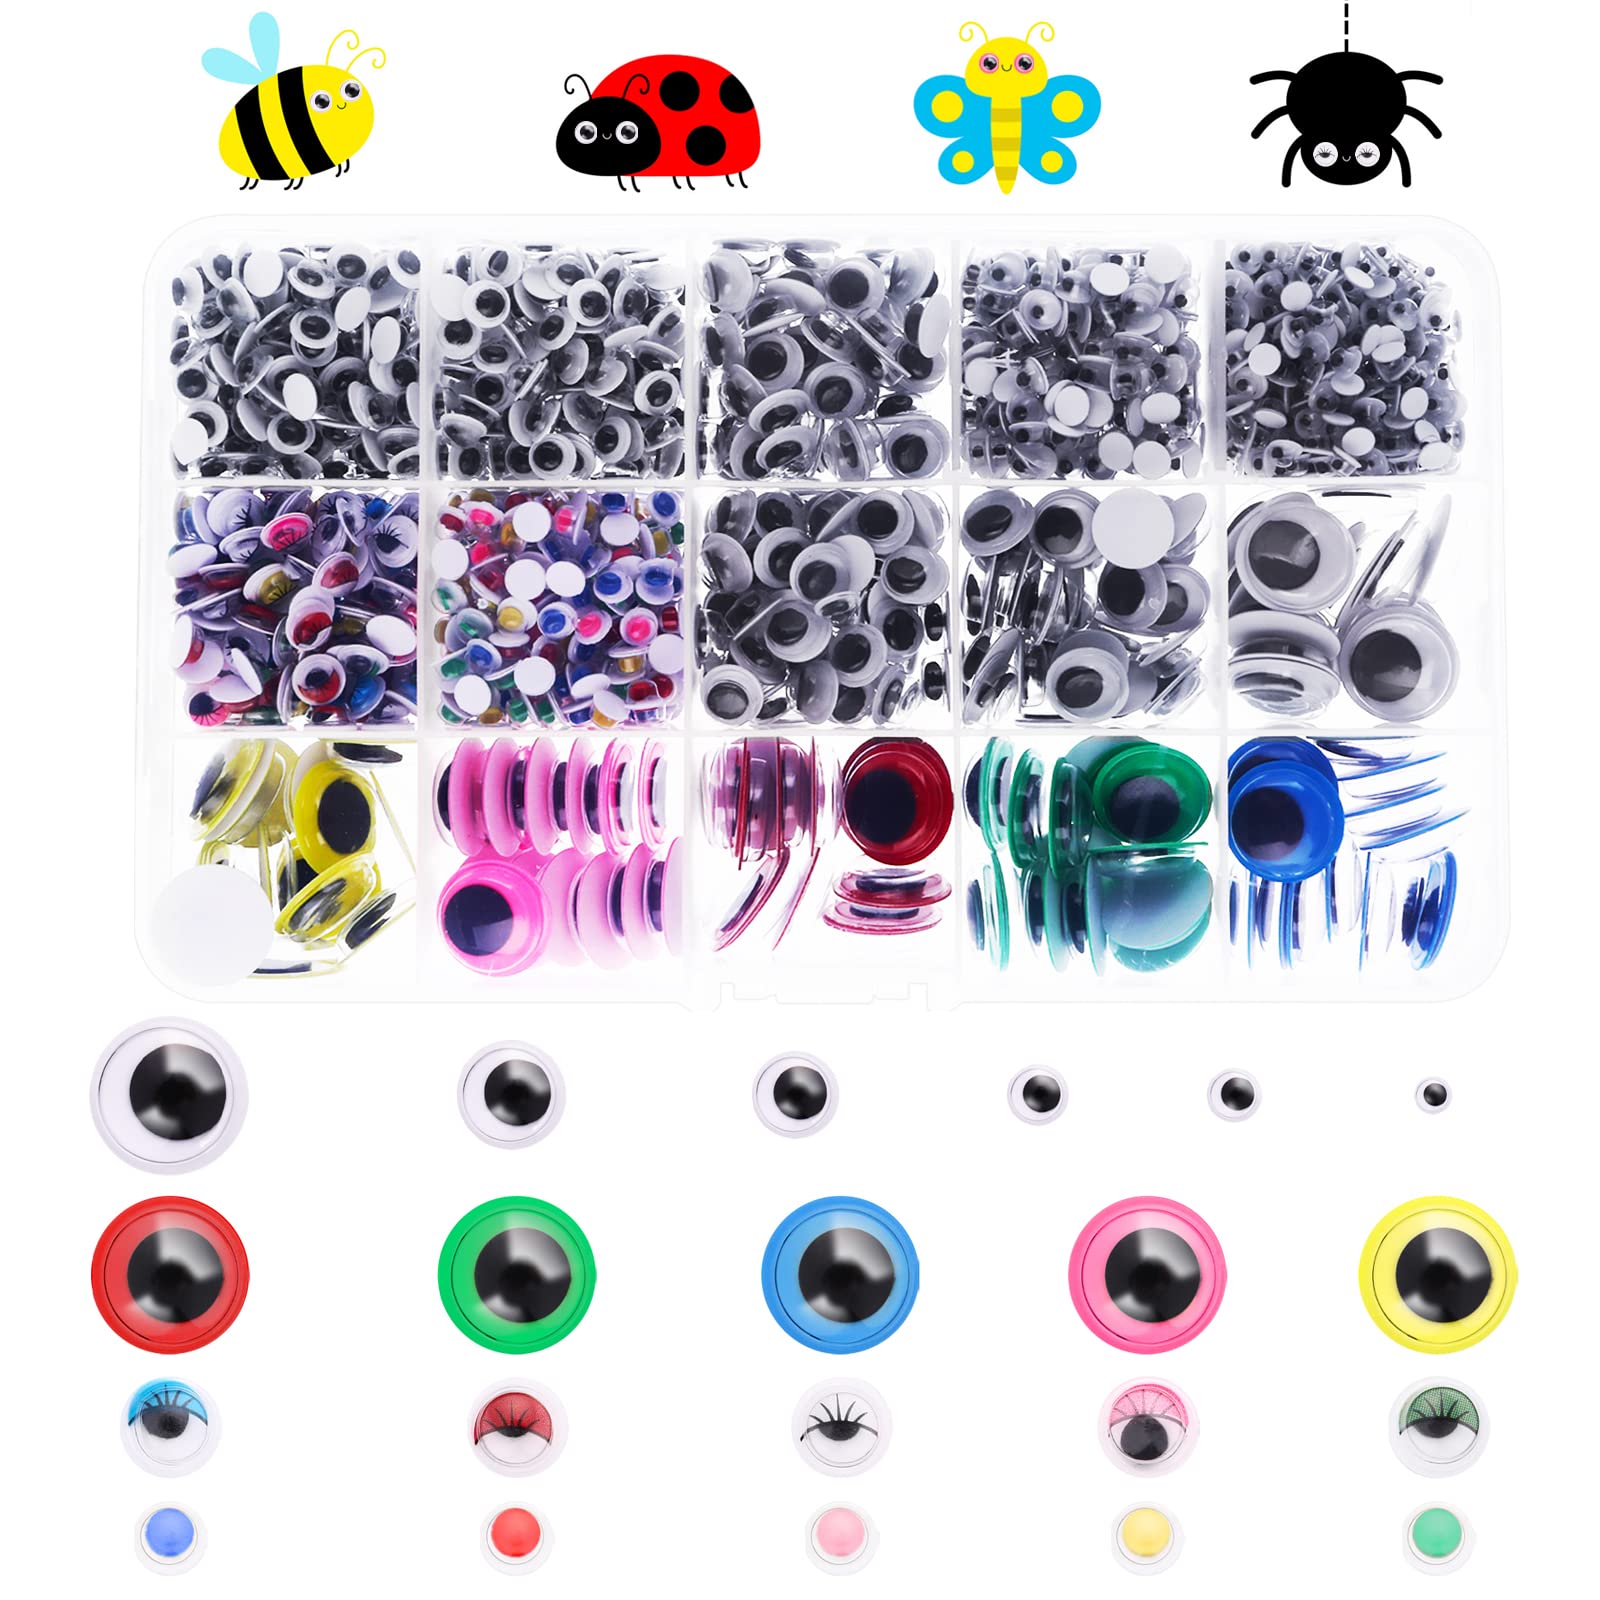 Prasacco 1500 Pcs Googly Eyes Self Adhesive, Wiggle Eyes for Crafts  Multi-Color Multi-Size (4/5/6/8/10/15mm)